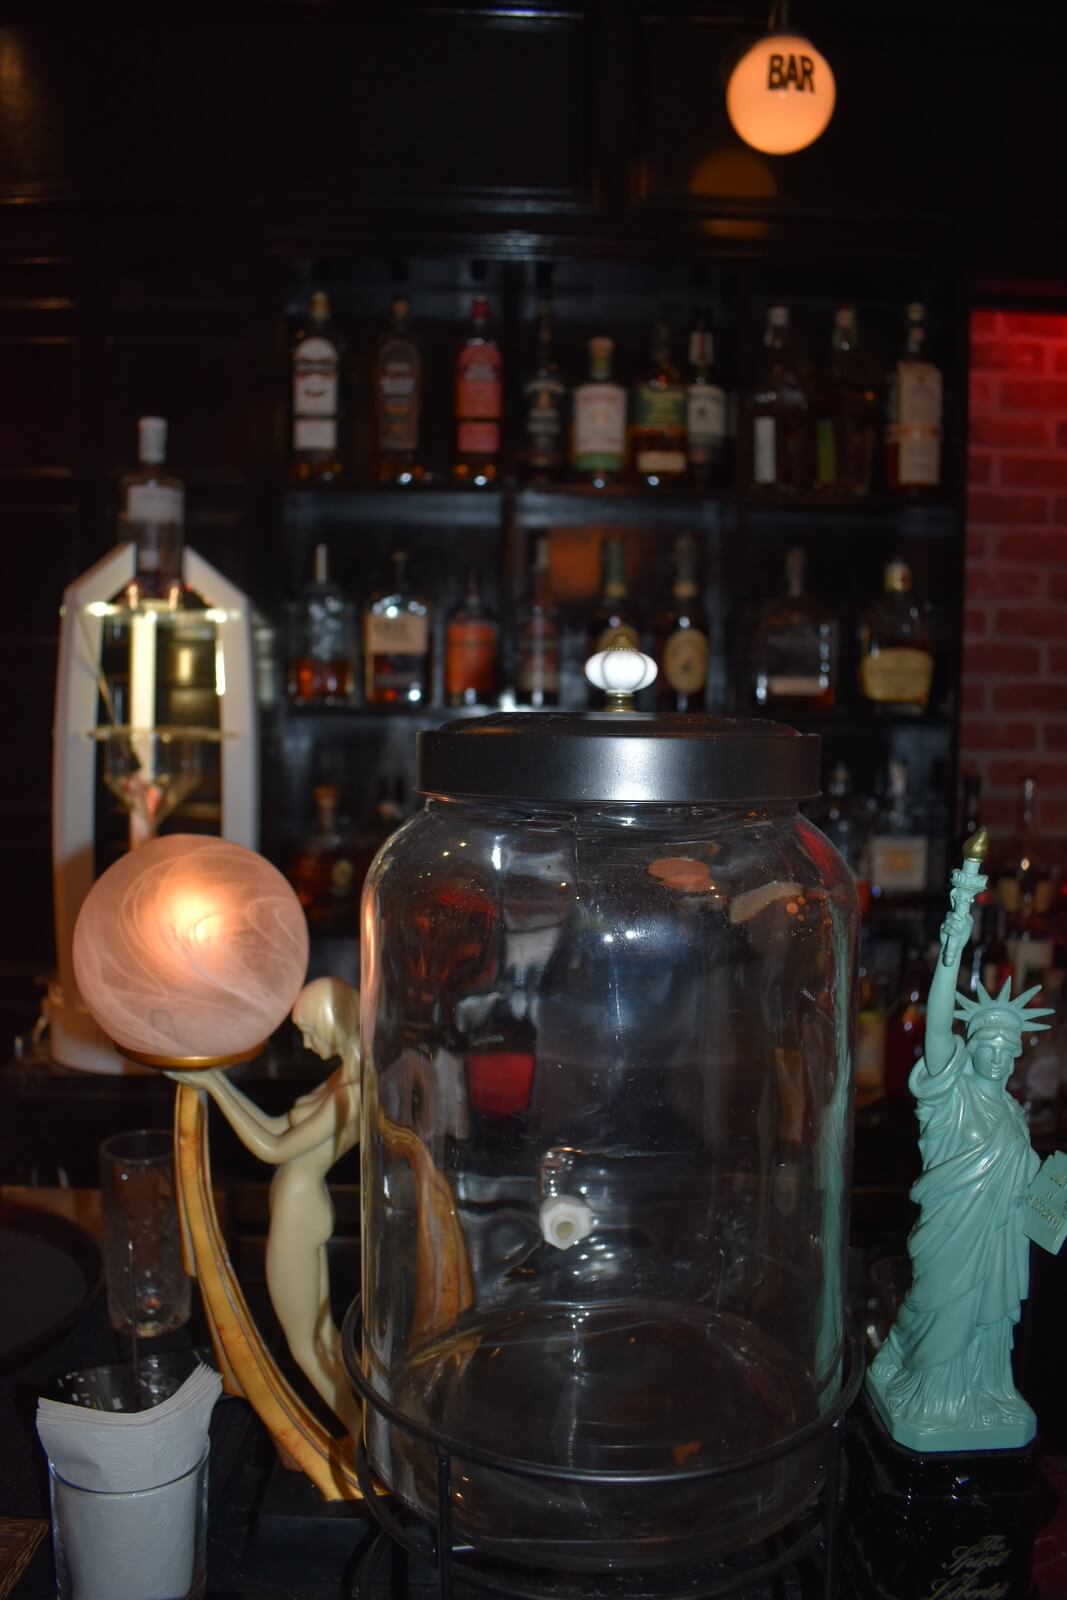 Empty glass container with a miniature statue of liberty on the right side